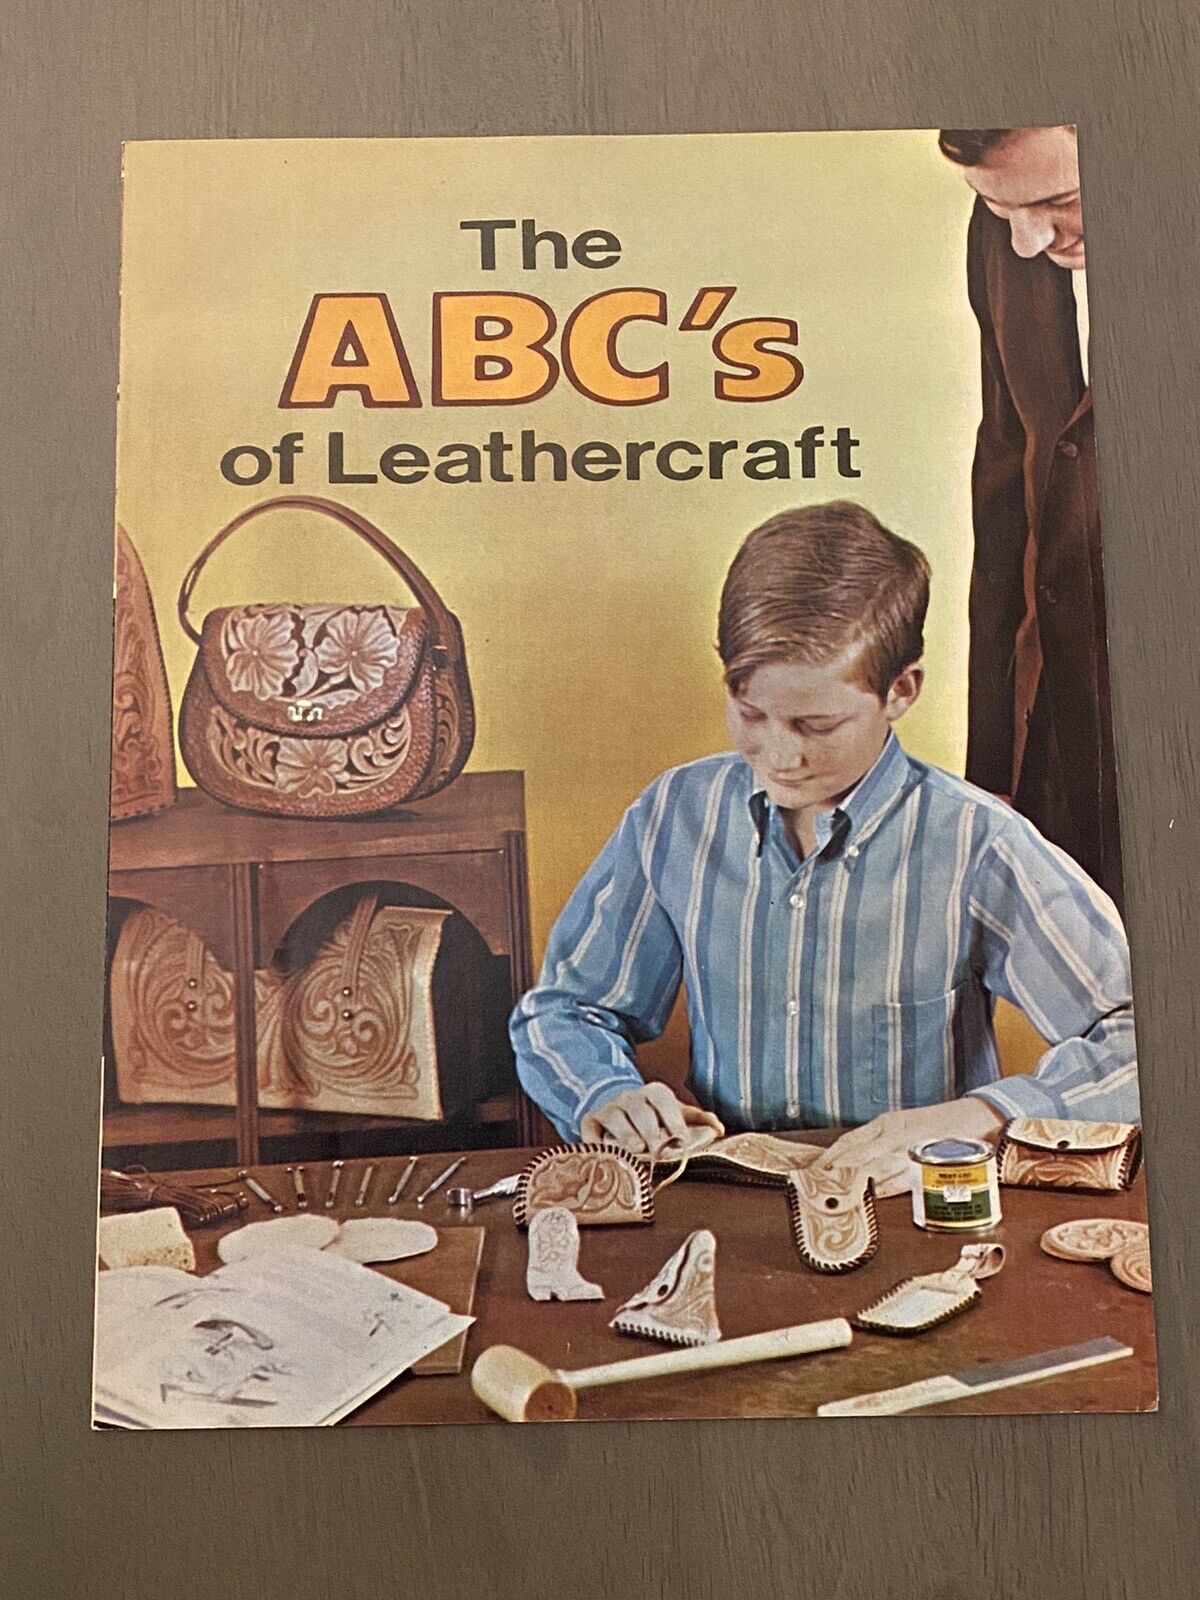 Vintage 1970s Retailer Advertisement: The ABC’s of Leathercraft: Tandy Leather